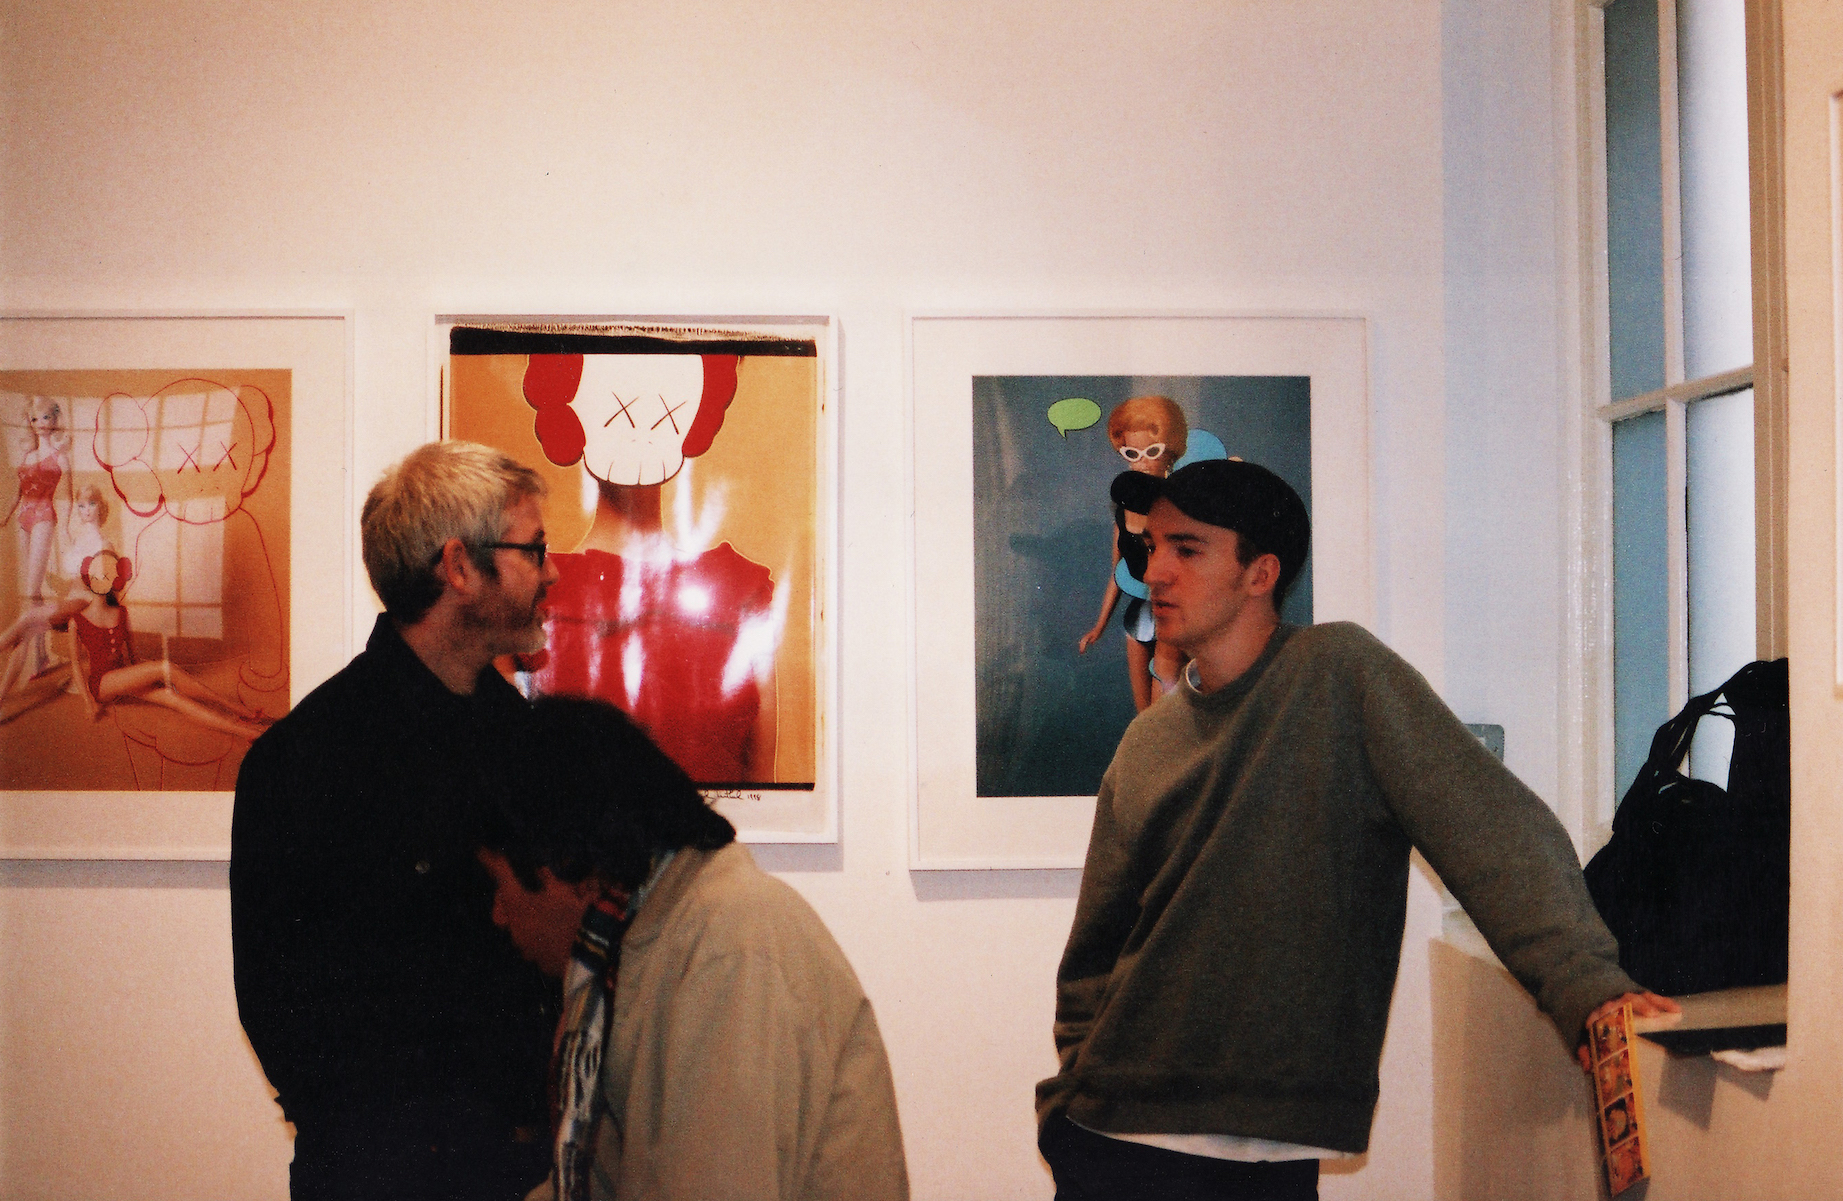 Fraser Cooke and KAWS at the exhibition